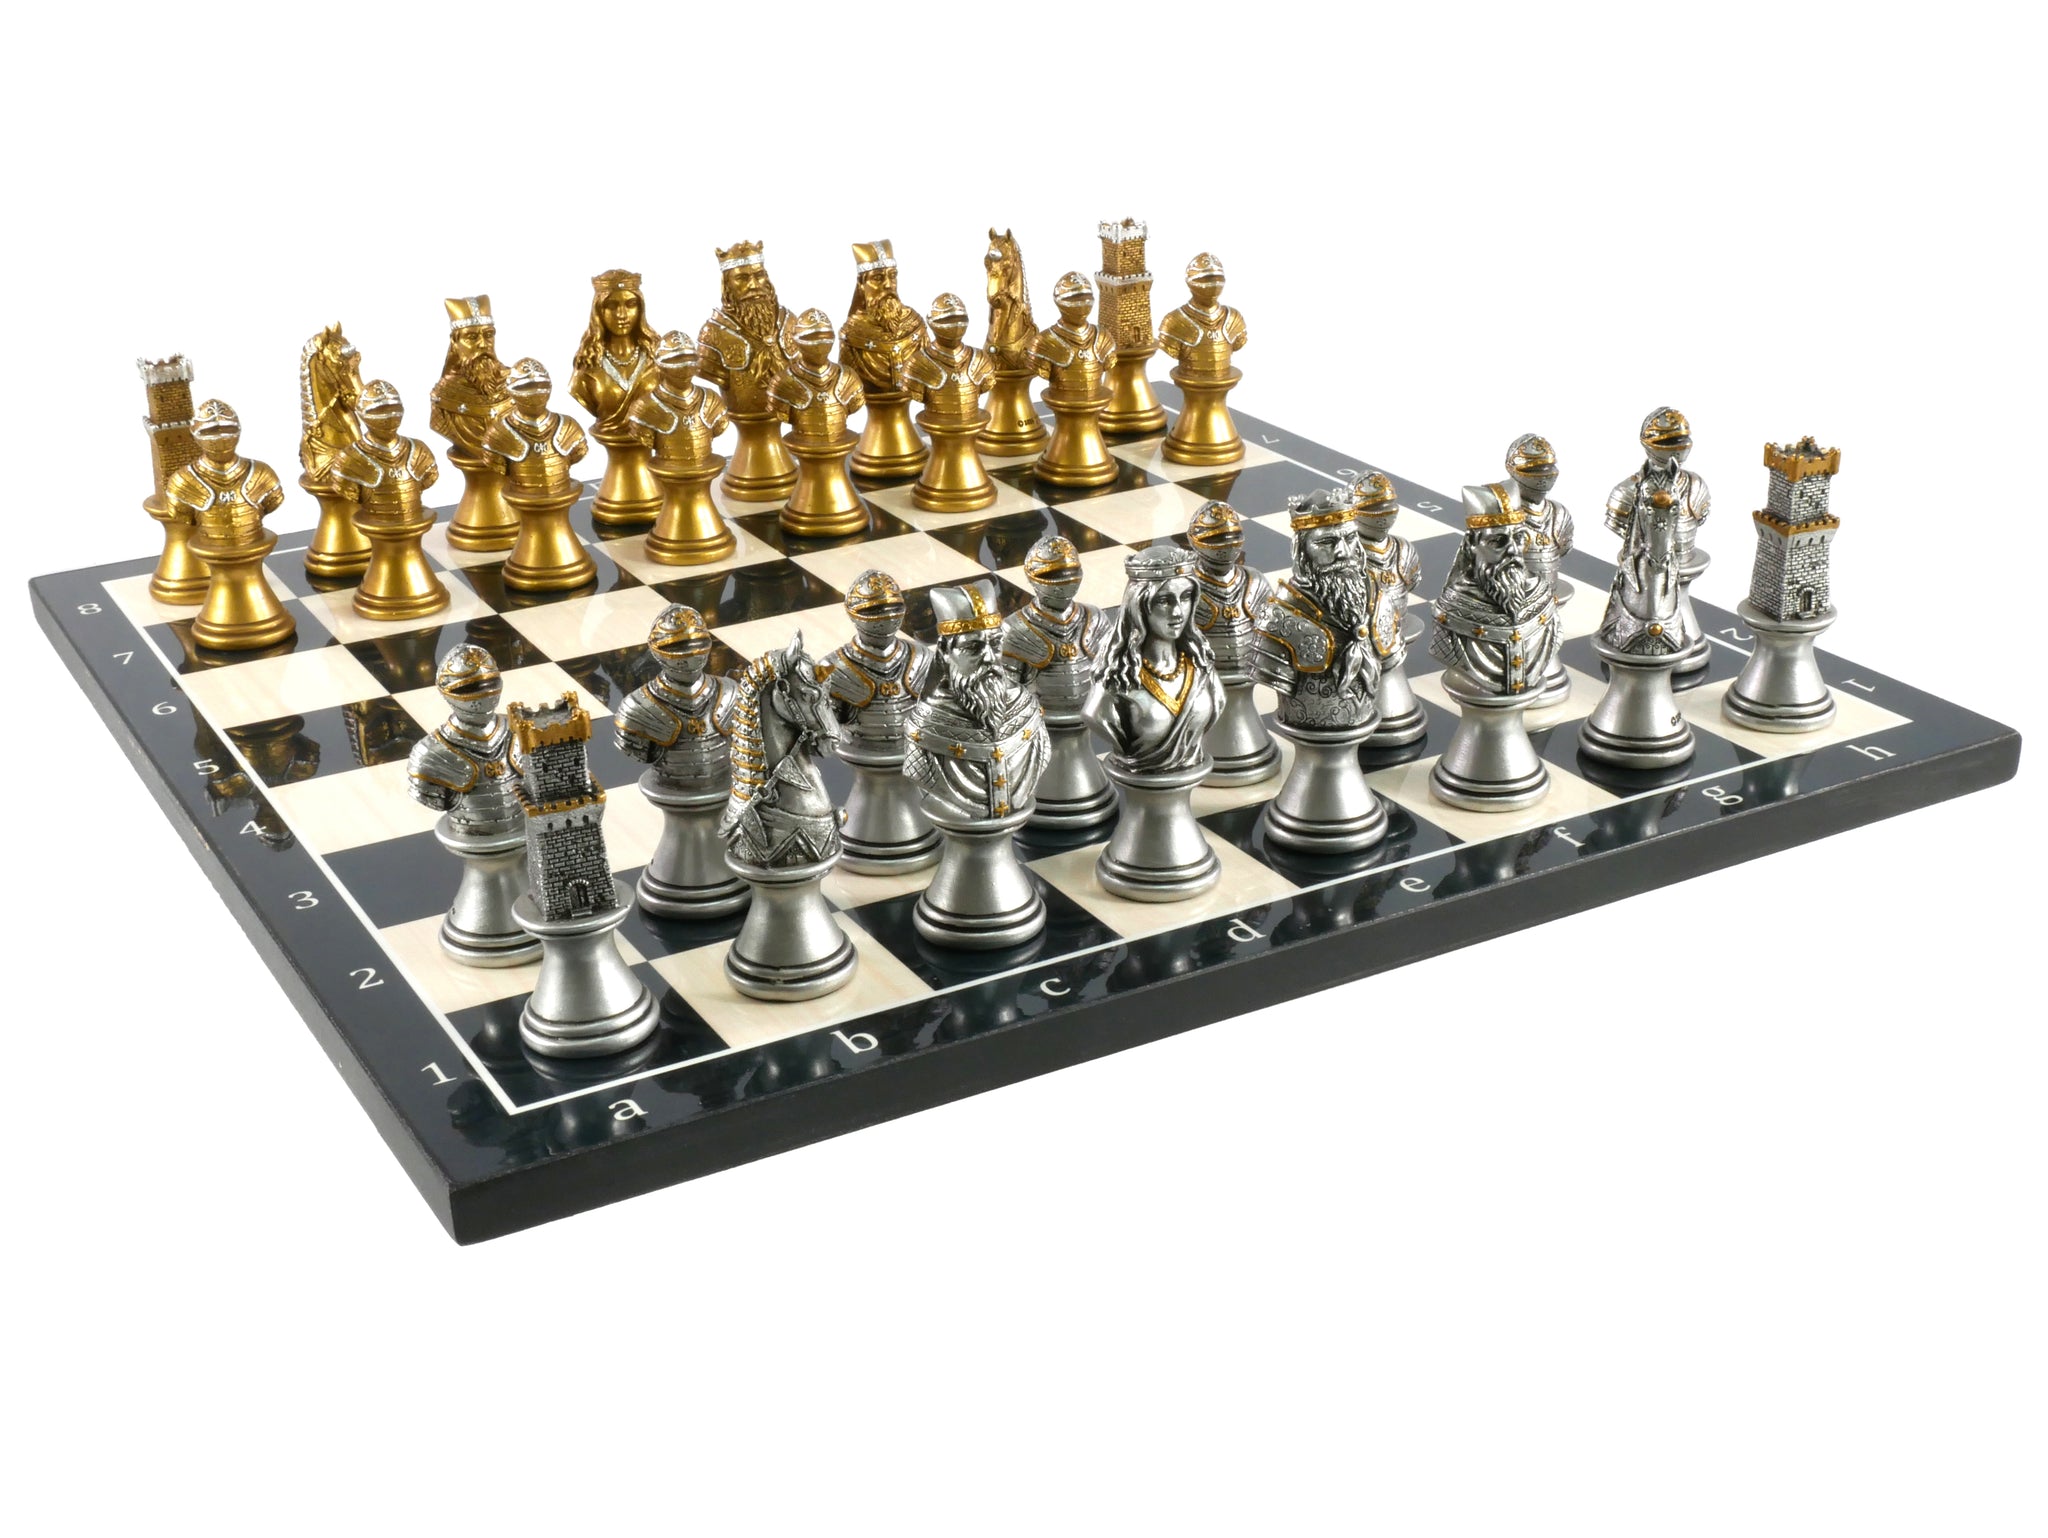 Chess Set - Resin Camelot Busts on Black/White Alpha Numeric Decoupage Chess Board